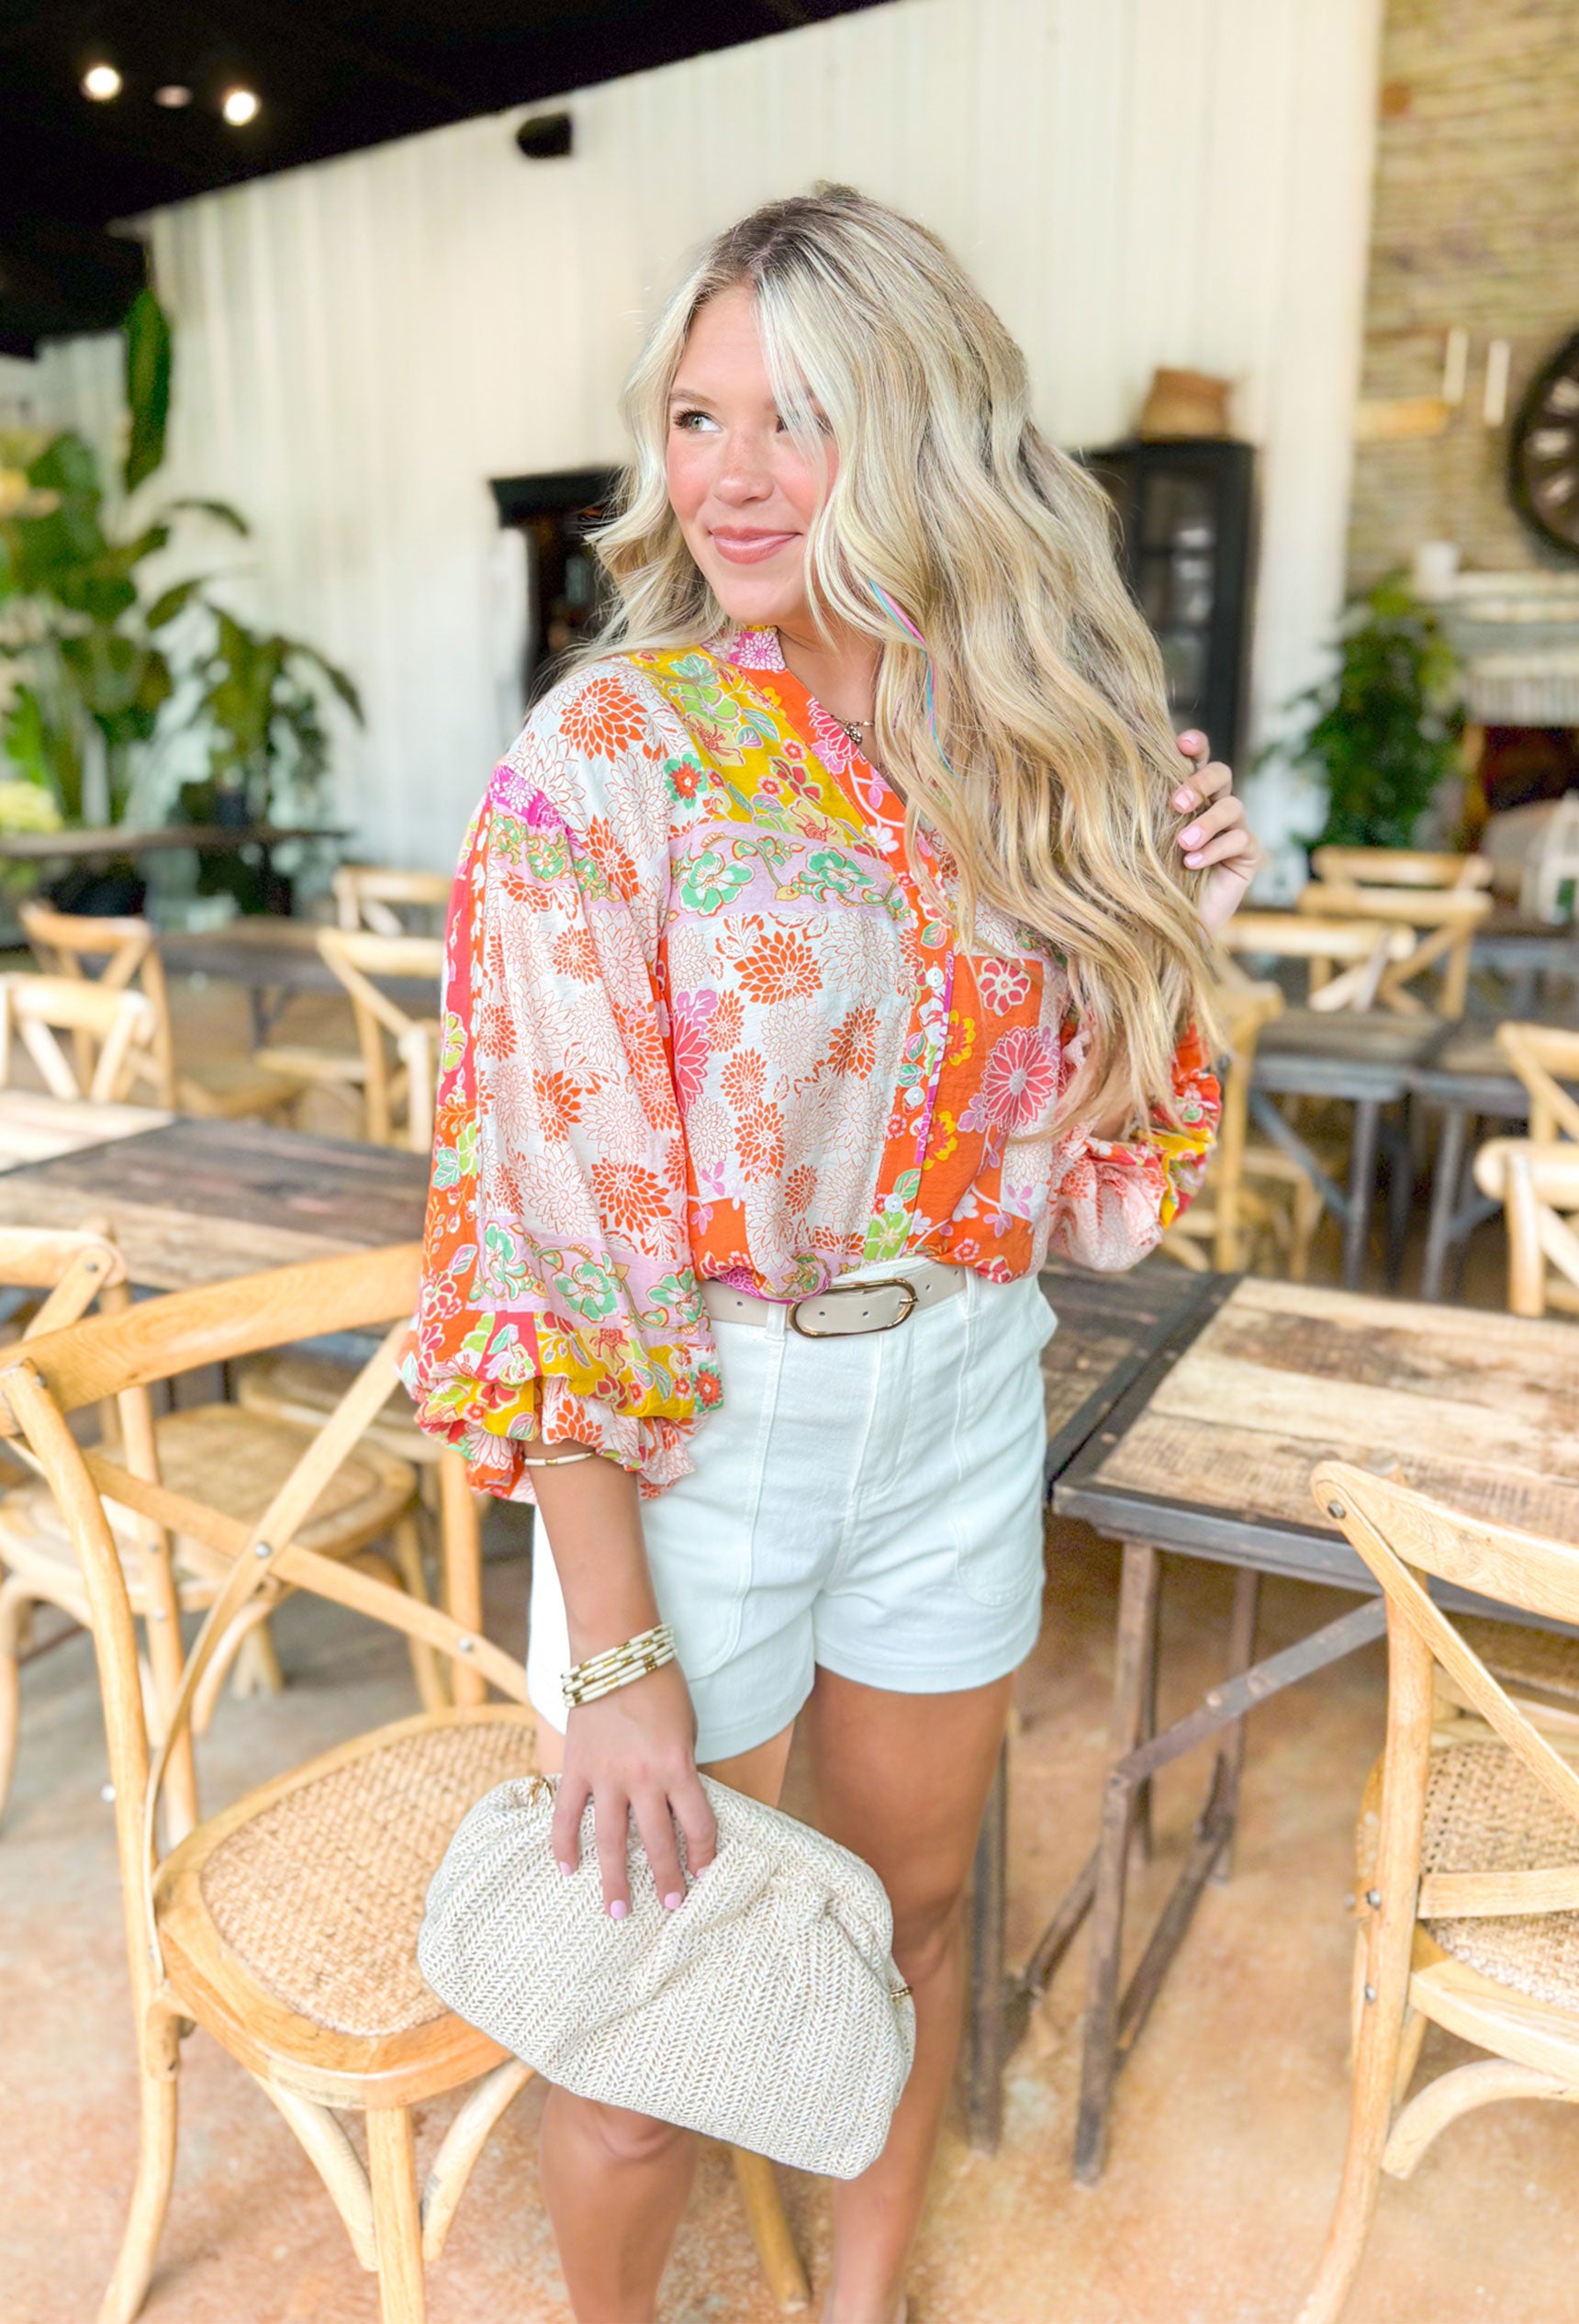 Spring Dream Floral Blouse, blouse quarter length sleeve button down with floral print in the colors orange, cream, yellow, green, and hot pink